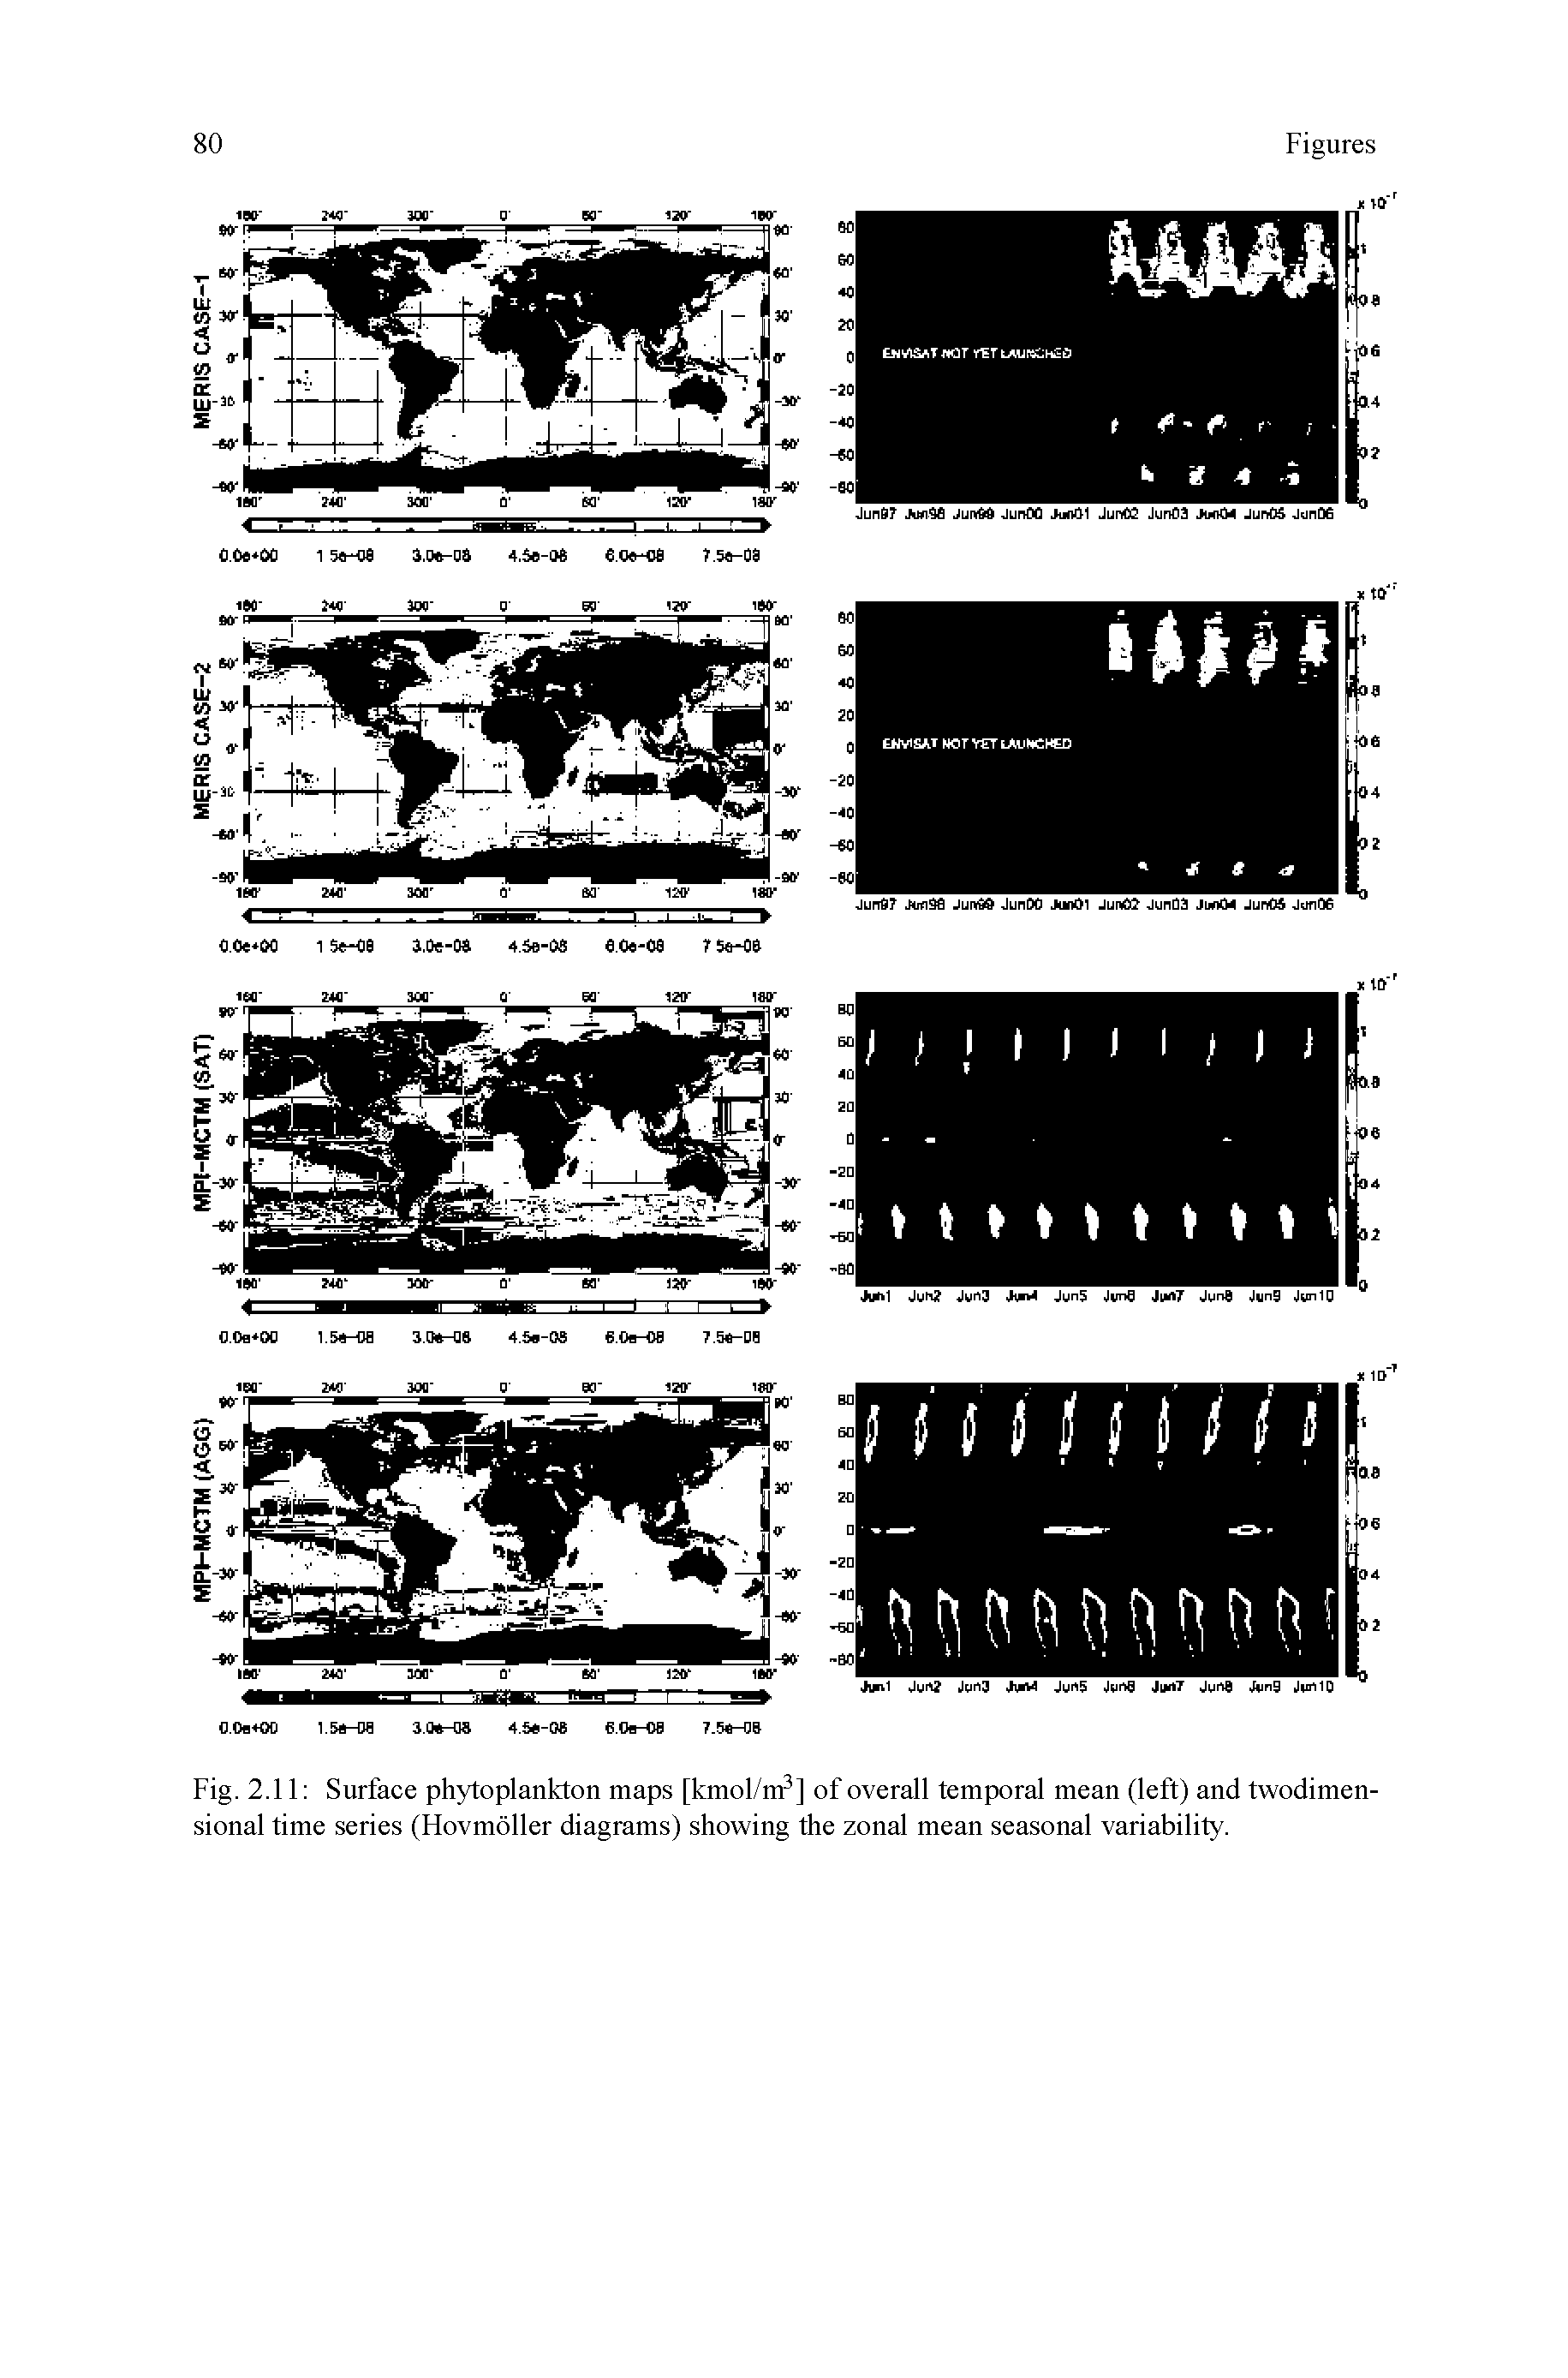 Fig. 2.11 Surface phytoplankton maps [kmol/m3] of overall temporal mean (left) and twodimensional time series (Hovmoller diagrams) showing the zonal mean seasonal variability.